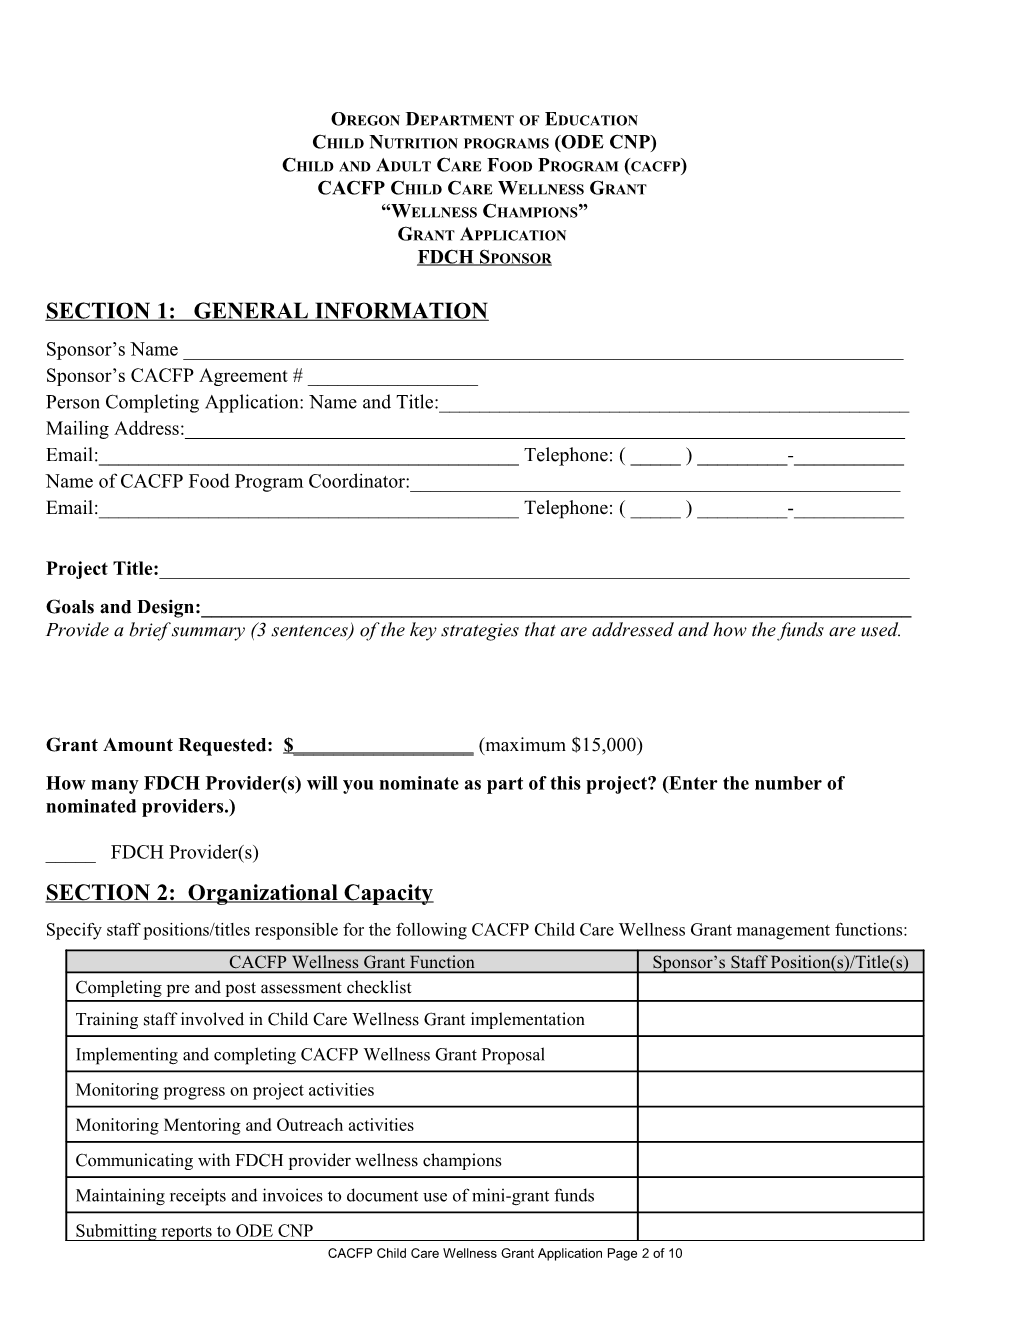 CACFP Child Care Wellness Grant Application Page 1 of 8